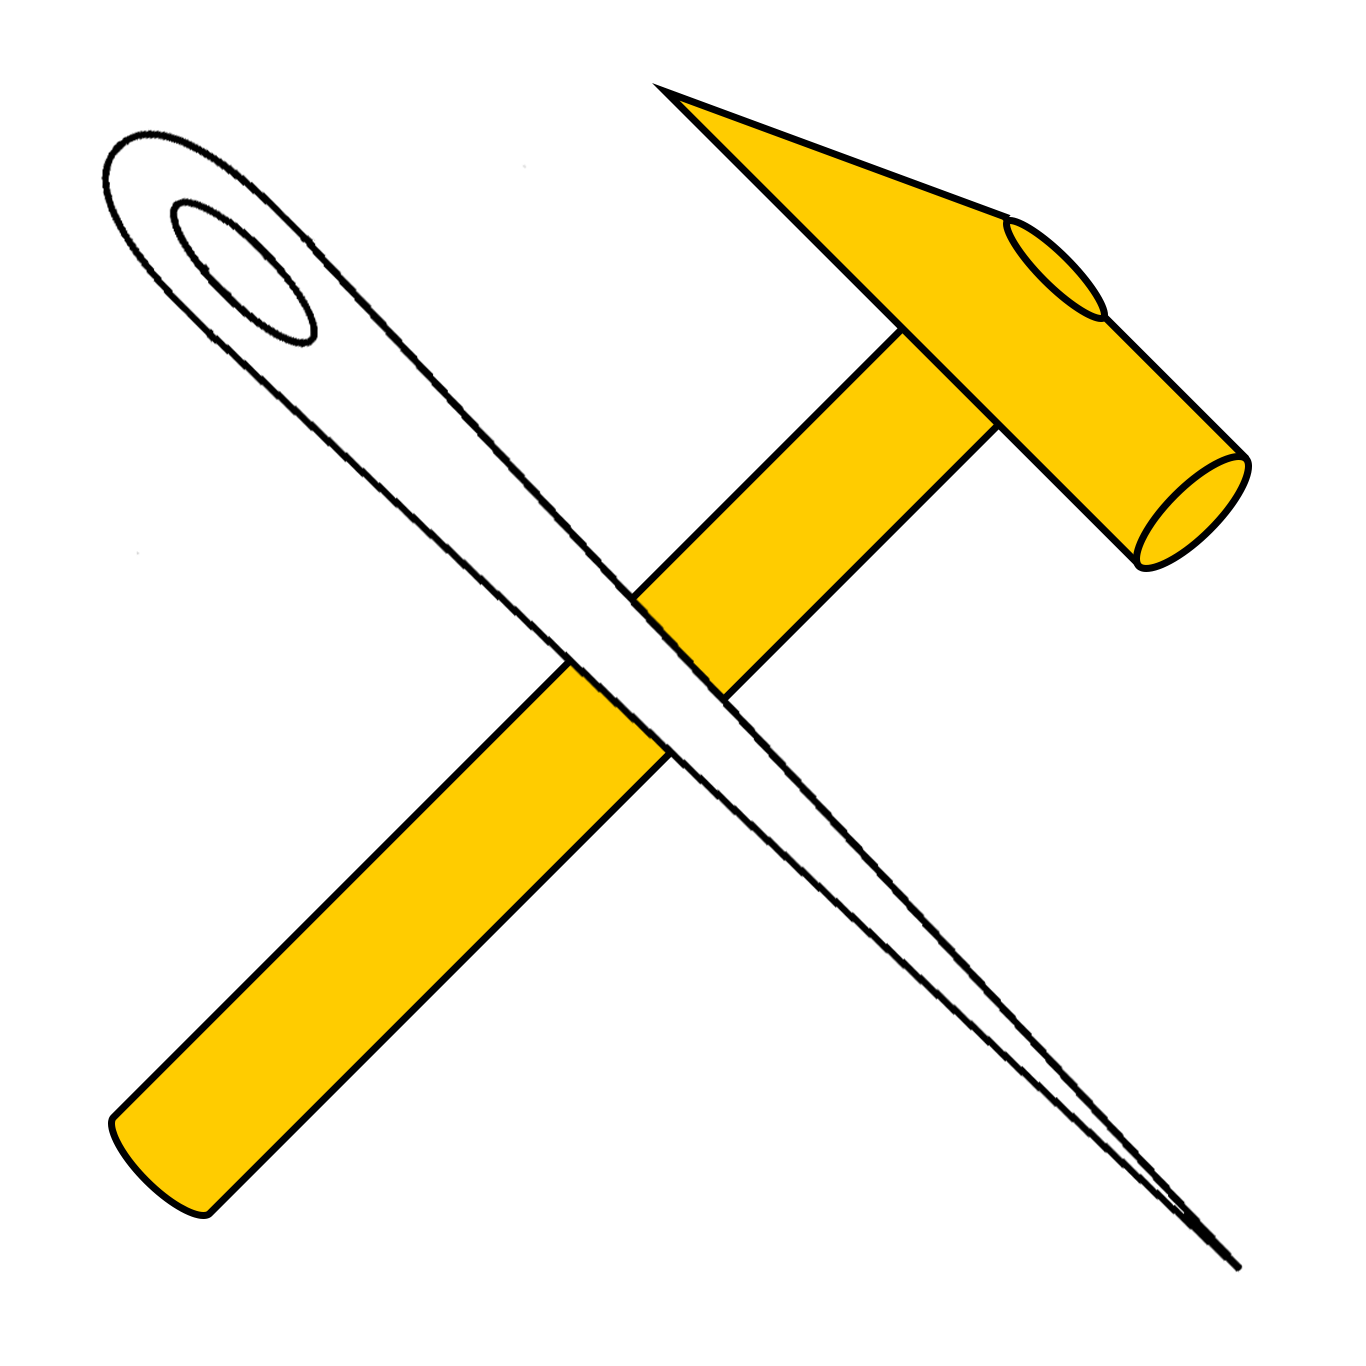 (Fieldless) In saltire a needle argent and a hammer reversed Or. 